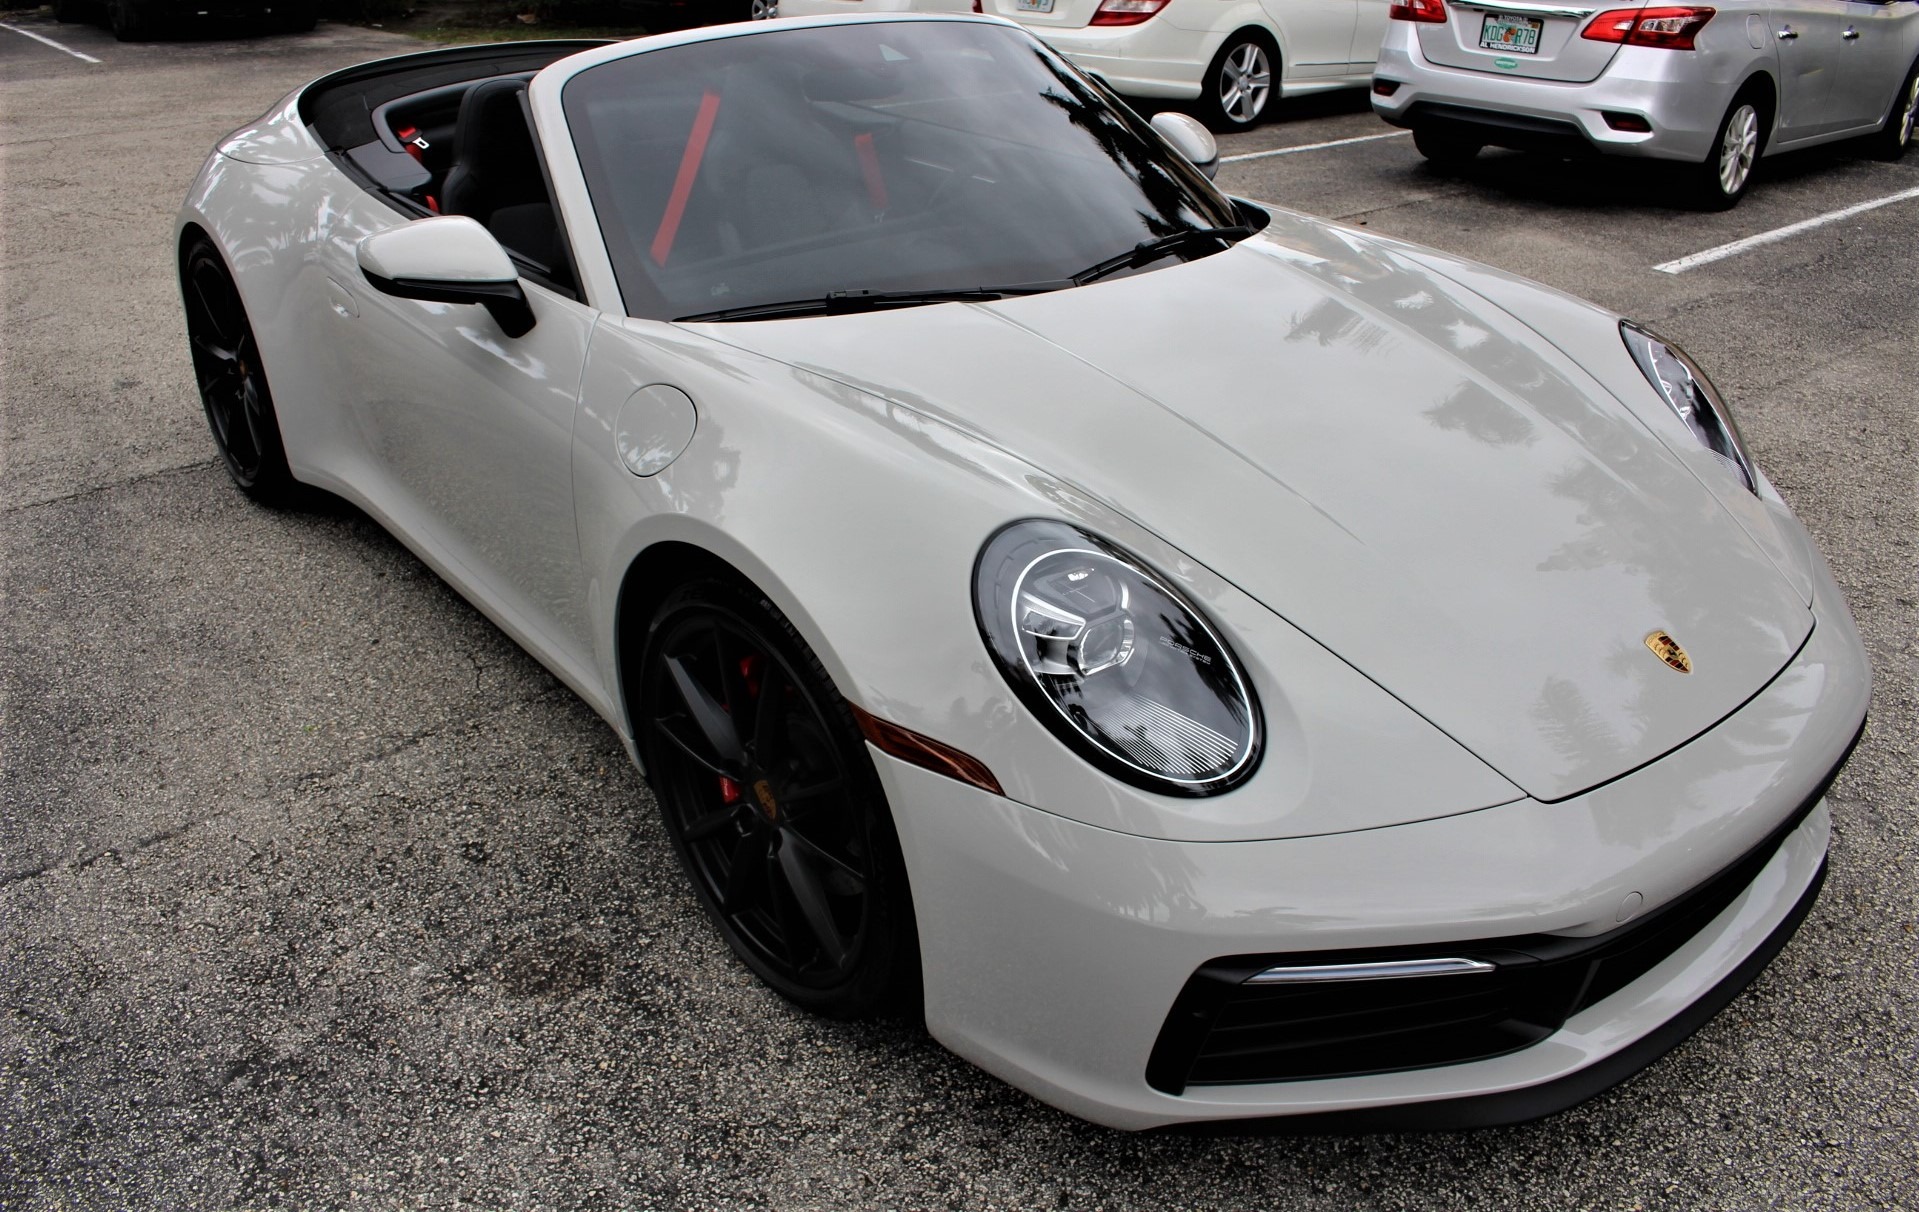 Used 2020 Porsche 911 Carrera S for sale Sold at The Gables Sports Cars in Miami FL 33146 1